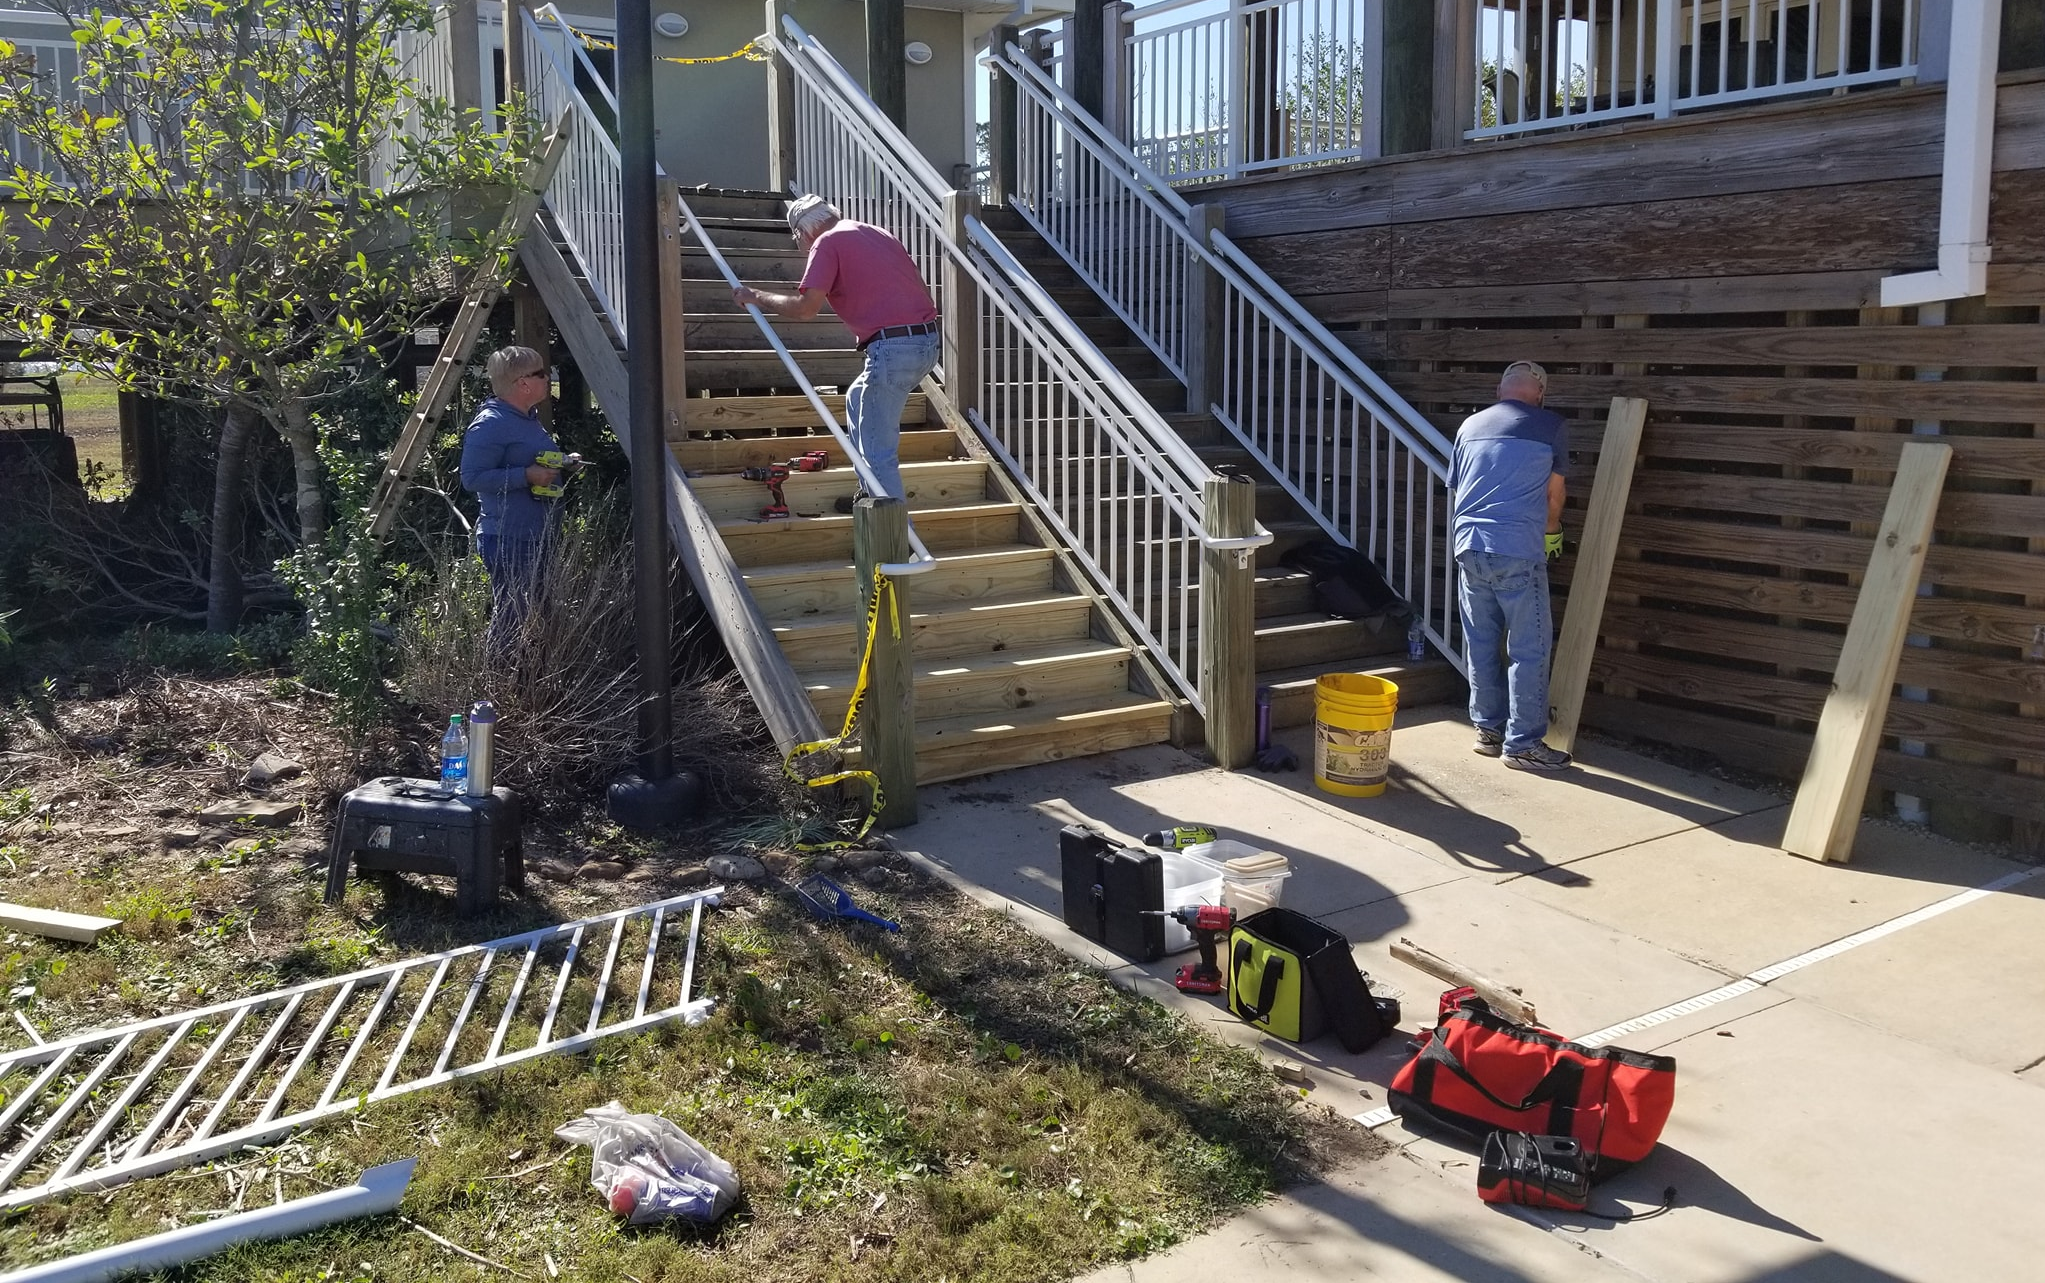 Volunteer Camp Hosts Repairing Stairs at the Nature Center